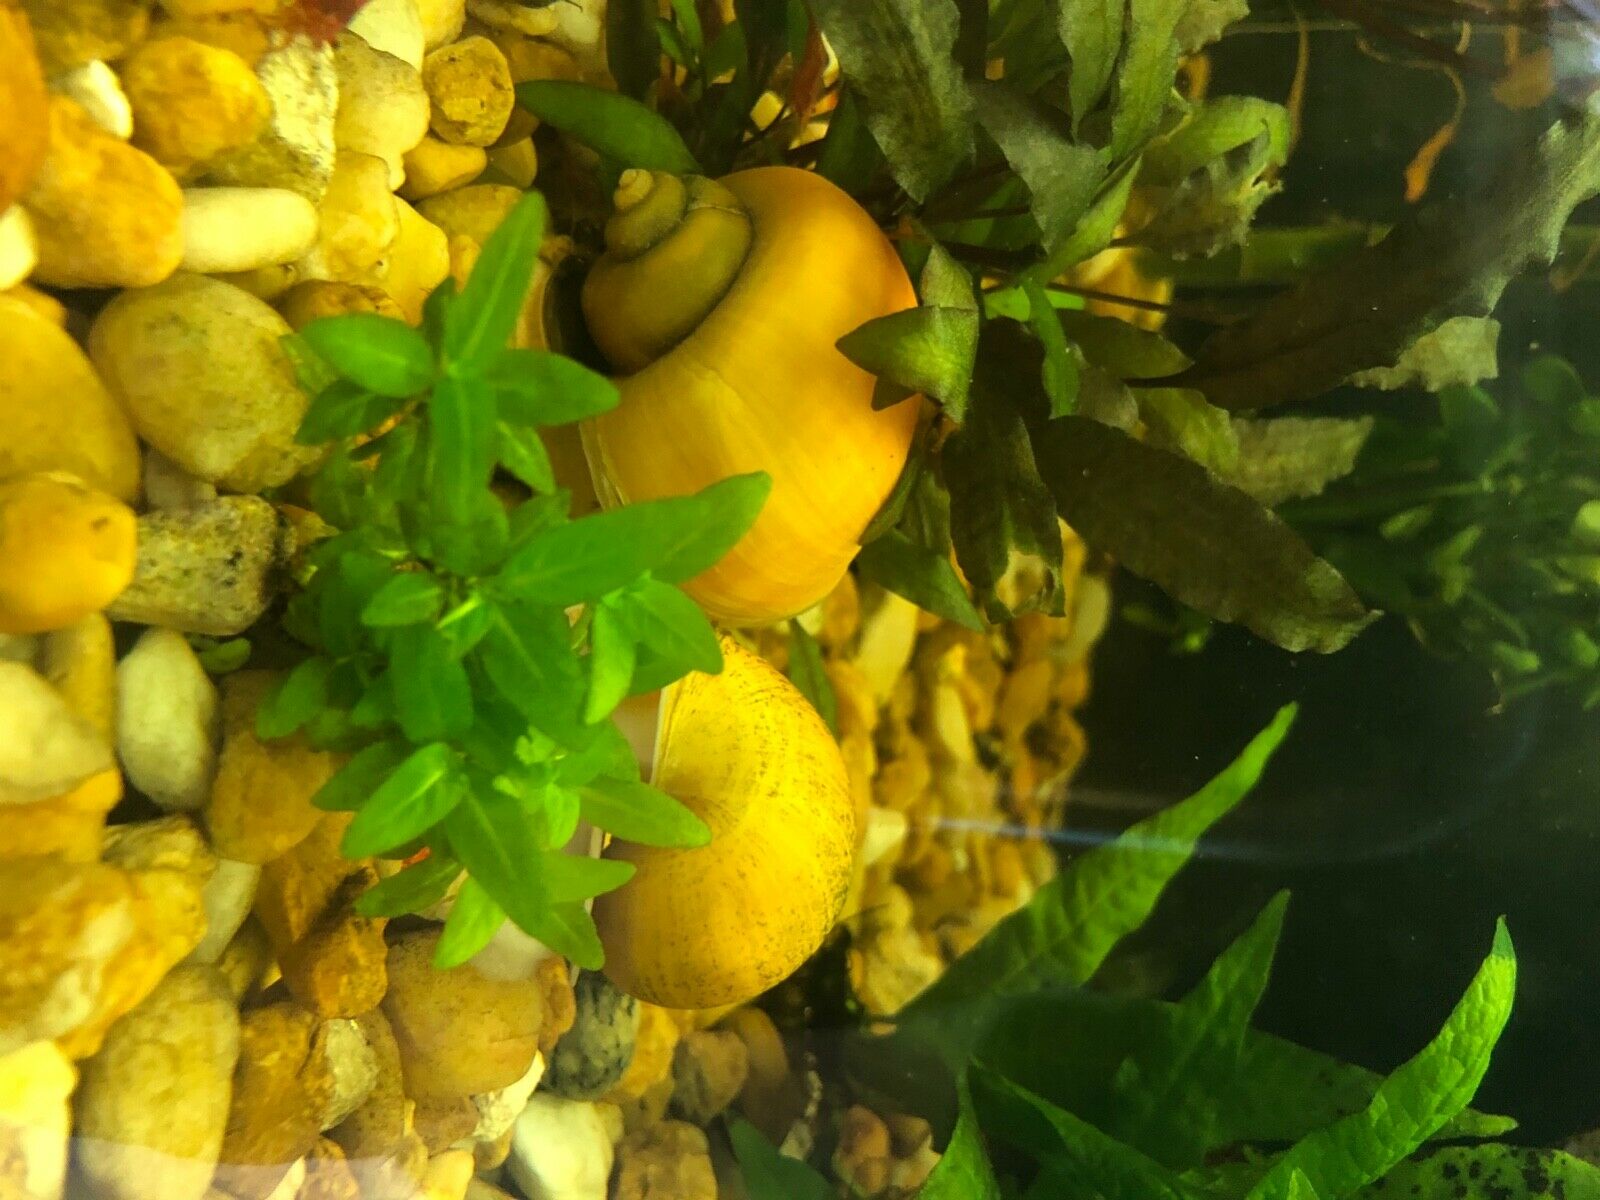 Gold Mystery snails, pea to nickel size, Freshwater Aquarium Snails